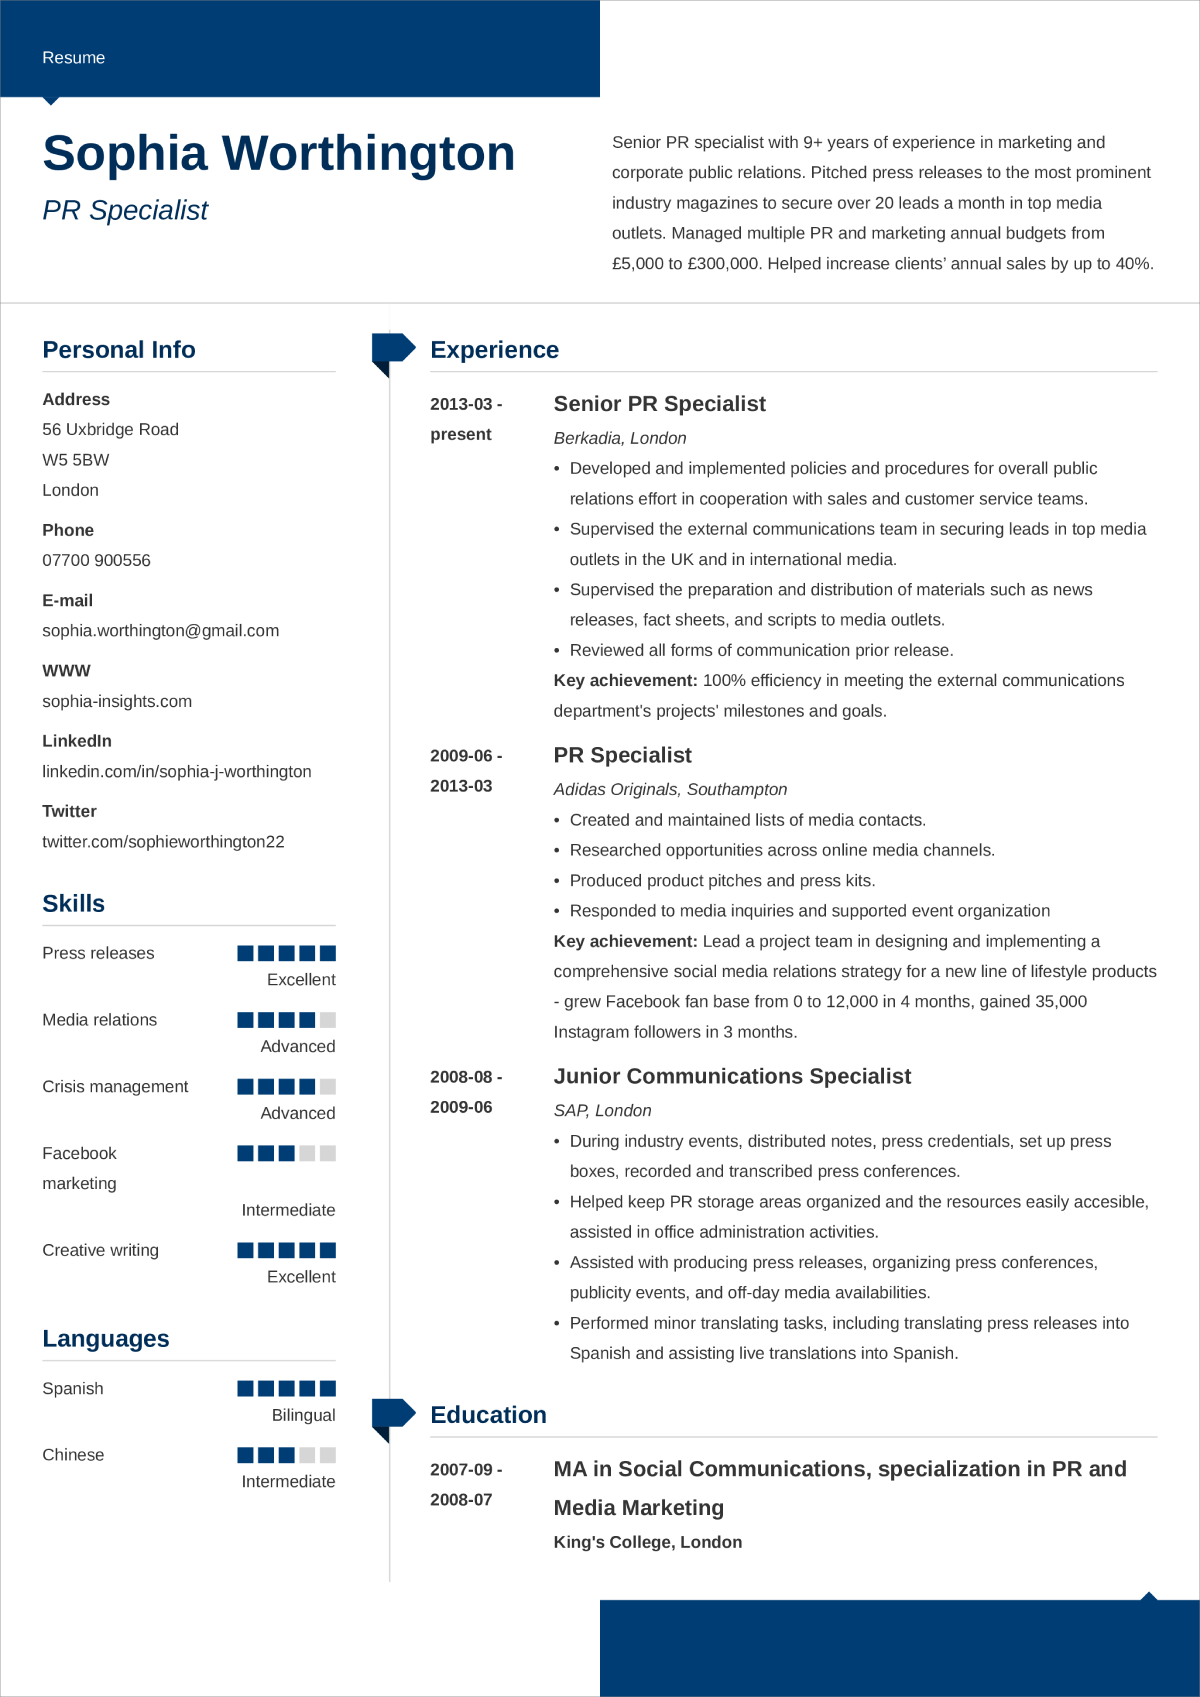 CV Layout: How to Lay Out a Professional CV 5+ Examples